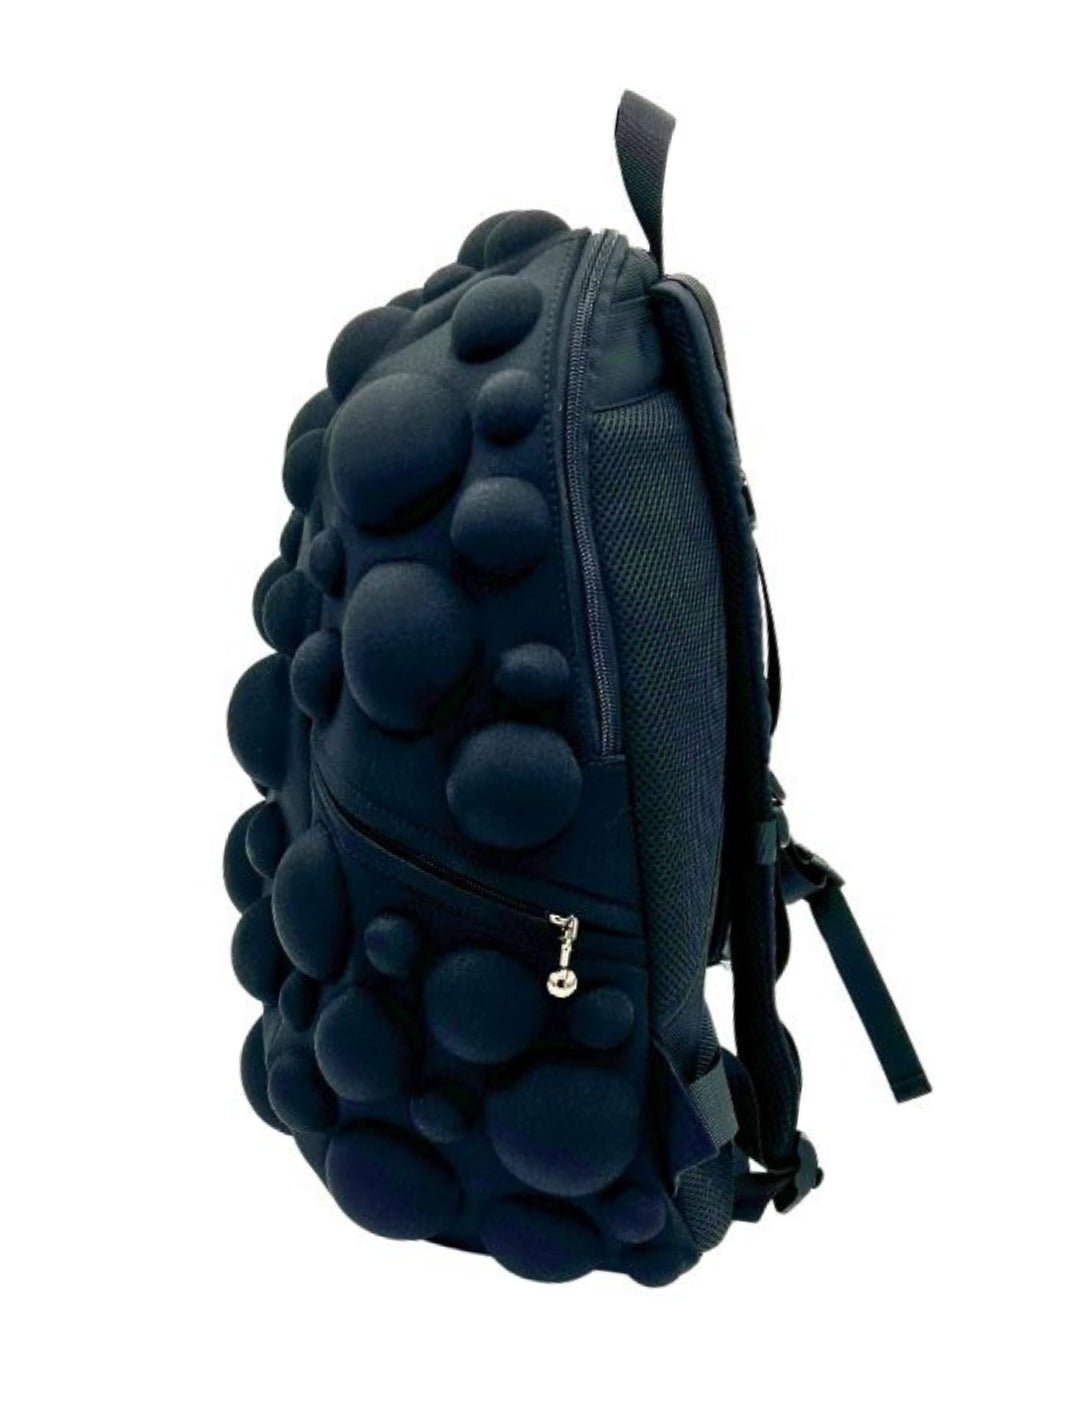 Side View of Black Magic Backpack | Madpax